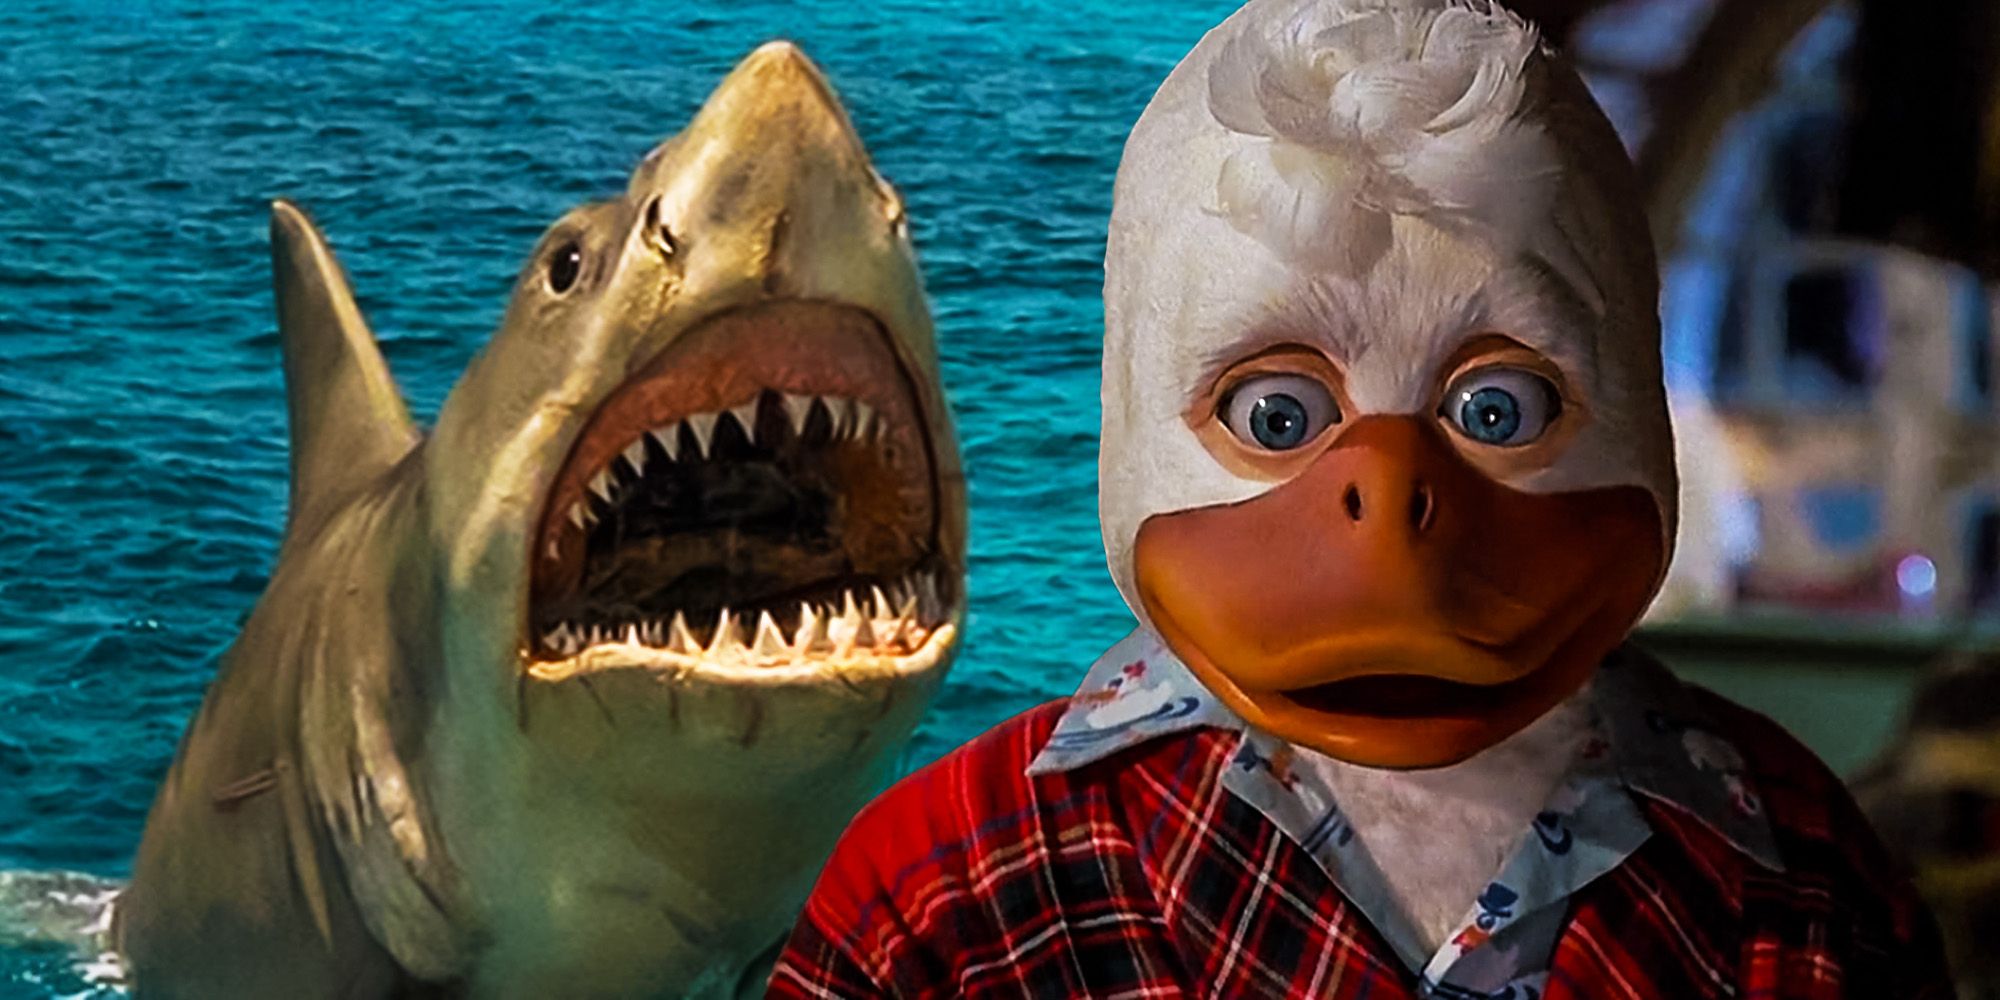 Howard the duck bombing led to jaws 4 being made